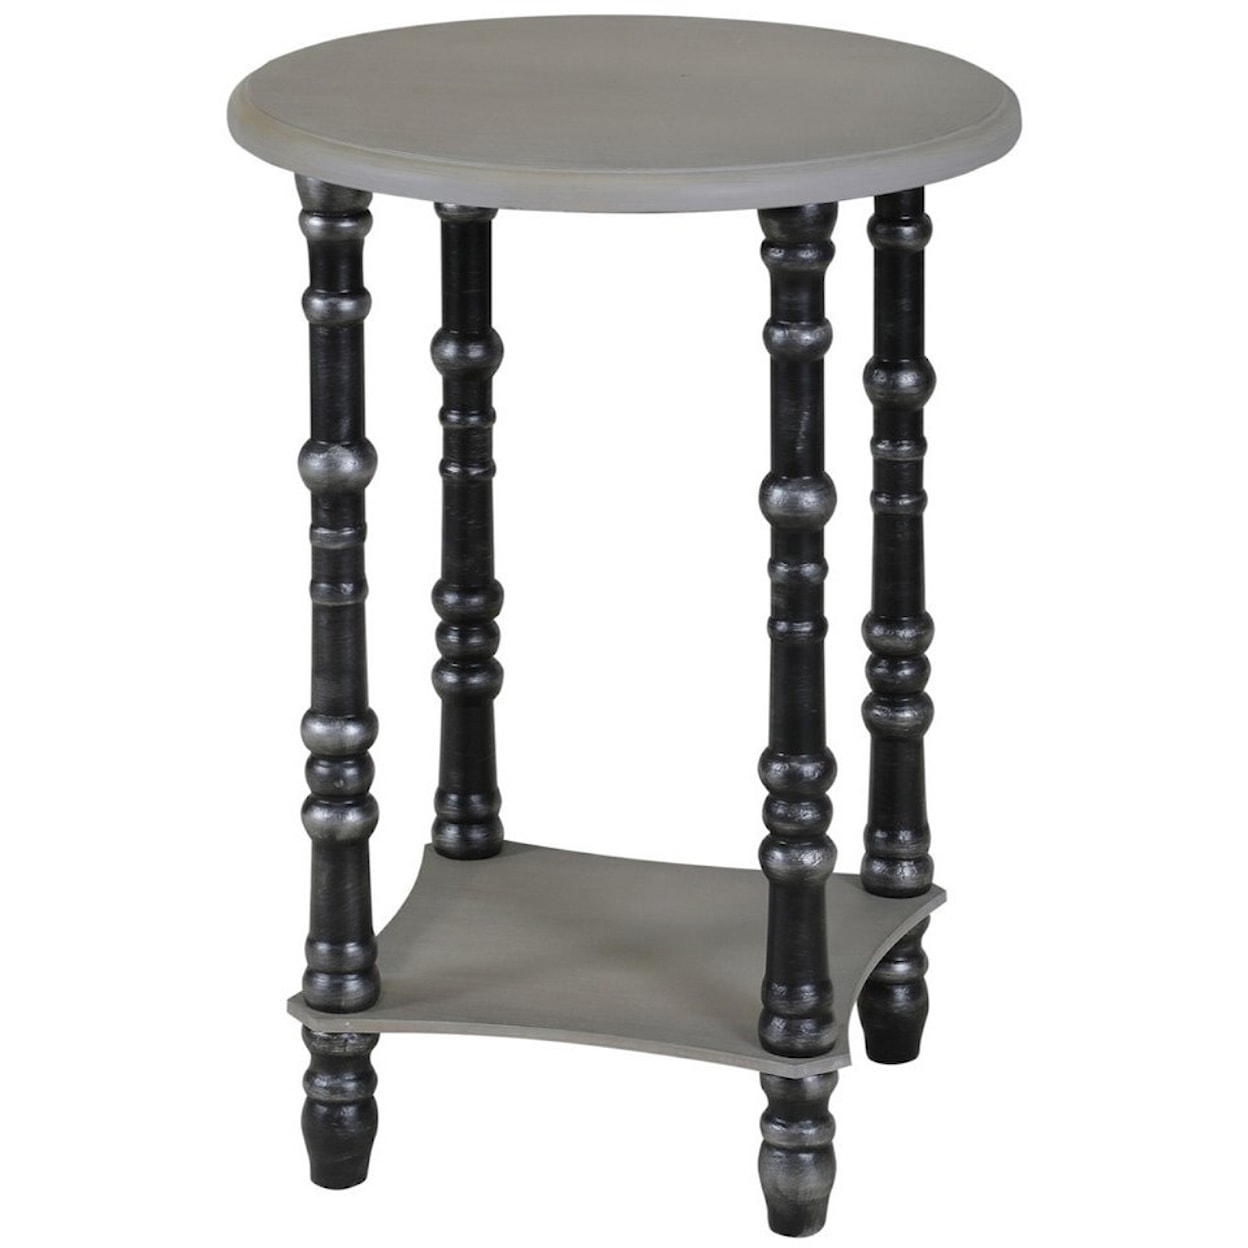 StyleCraft Occasional Tables Belmar Round End Table